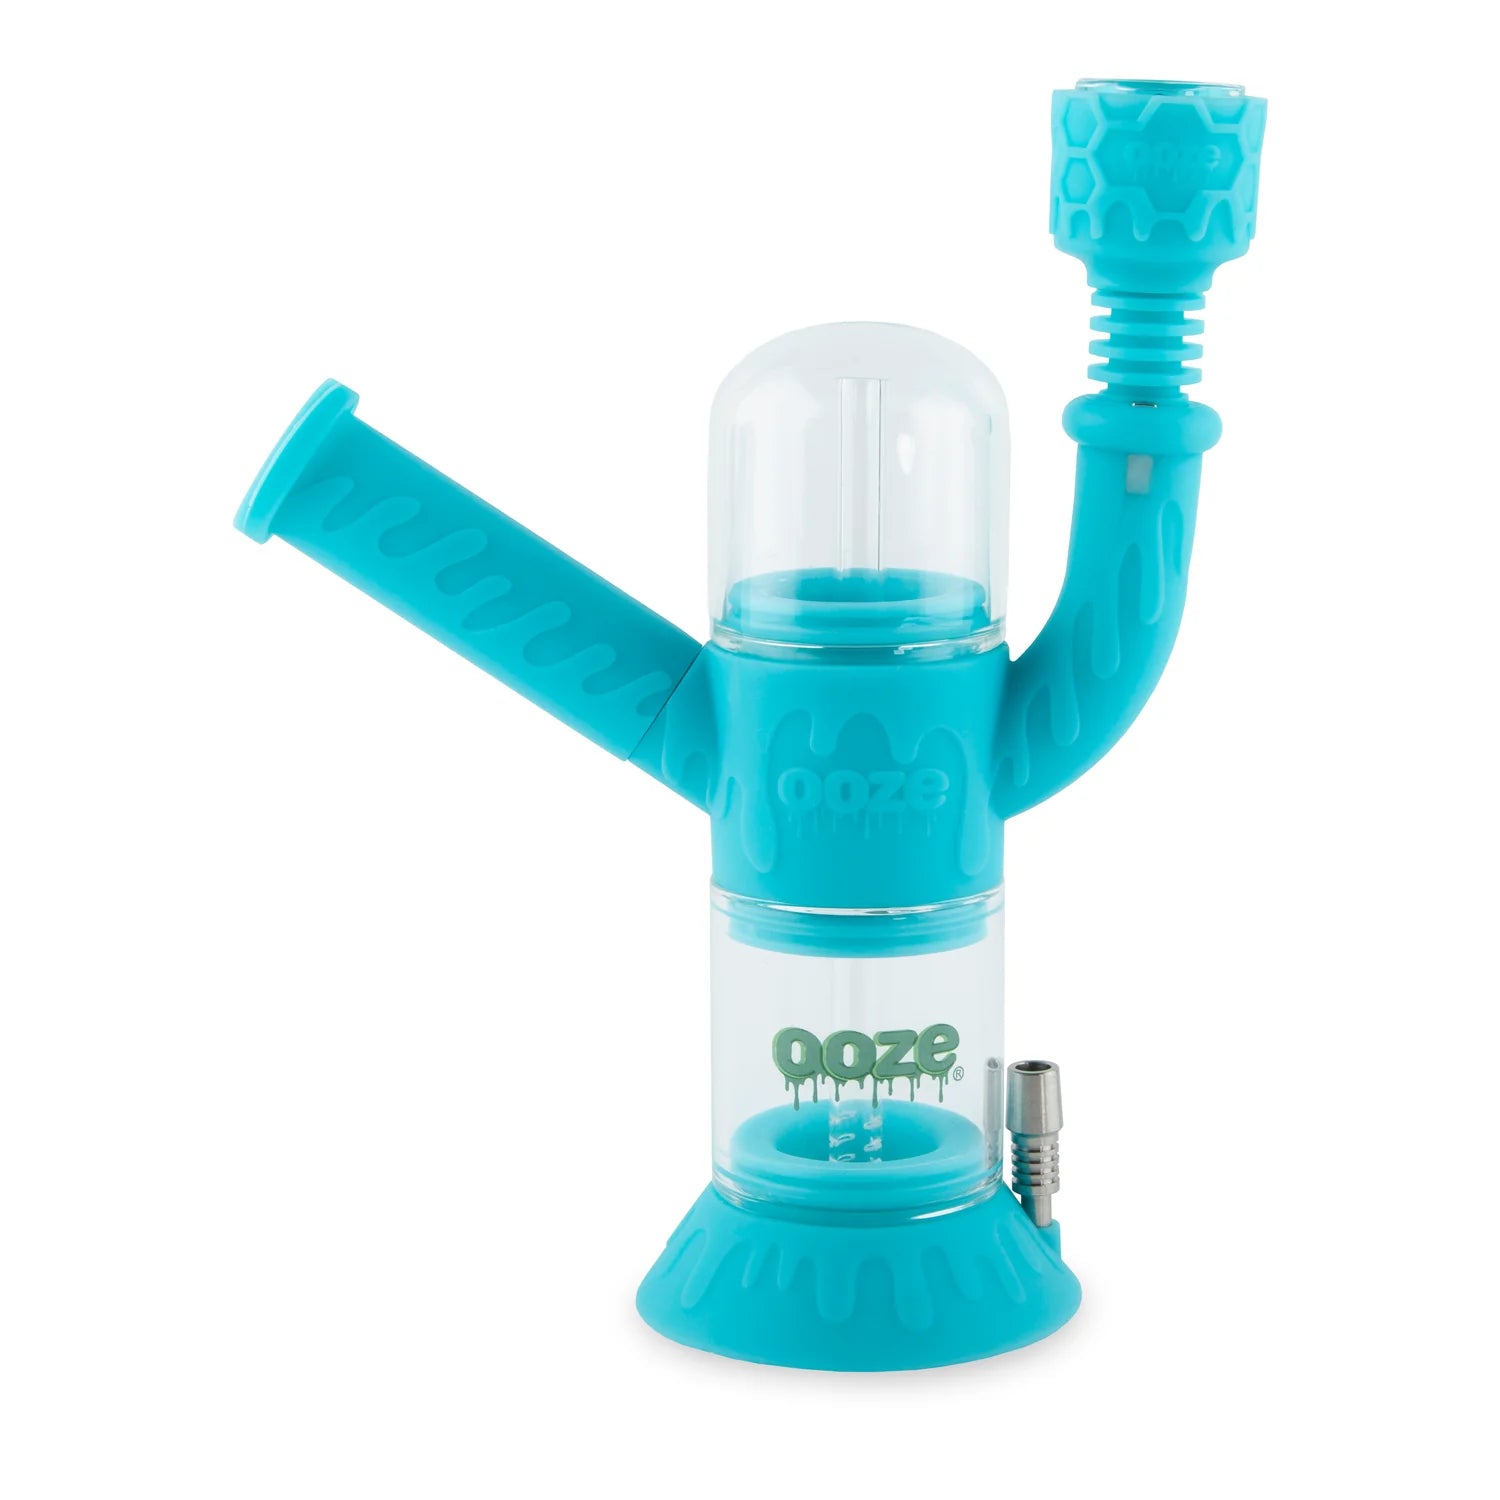 OOZE CRANIUM SILICONE WATER PIPE & NECTAR COLLECTOR Aqua Teal